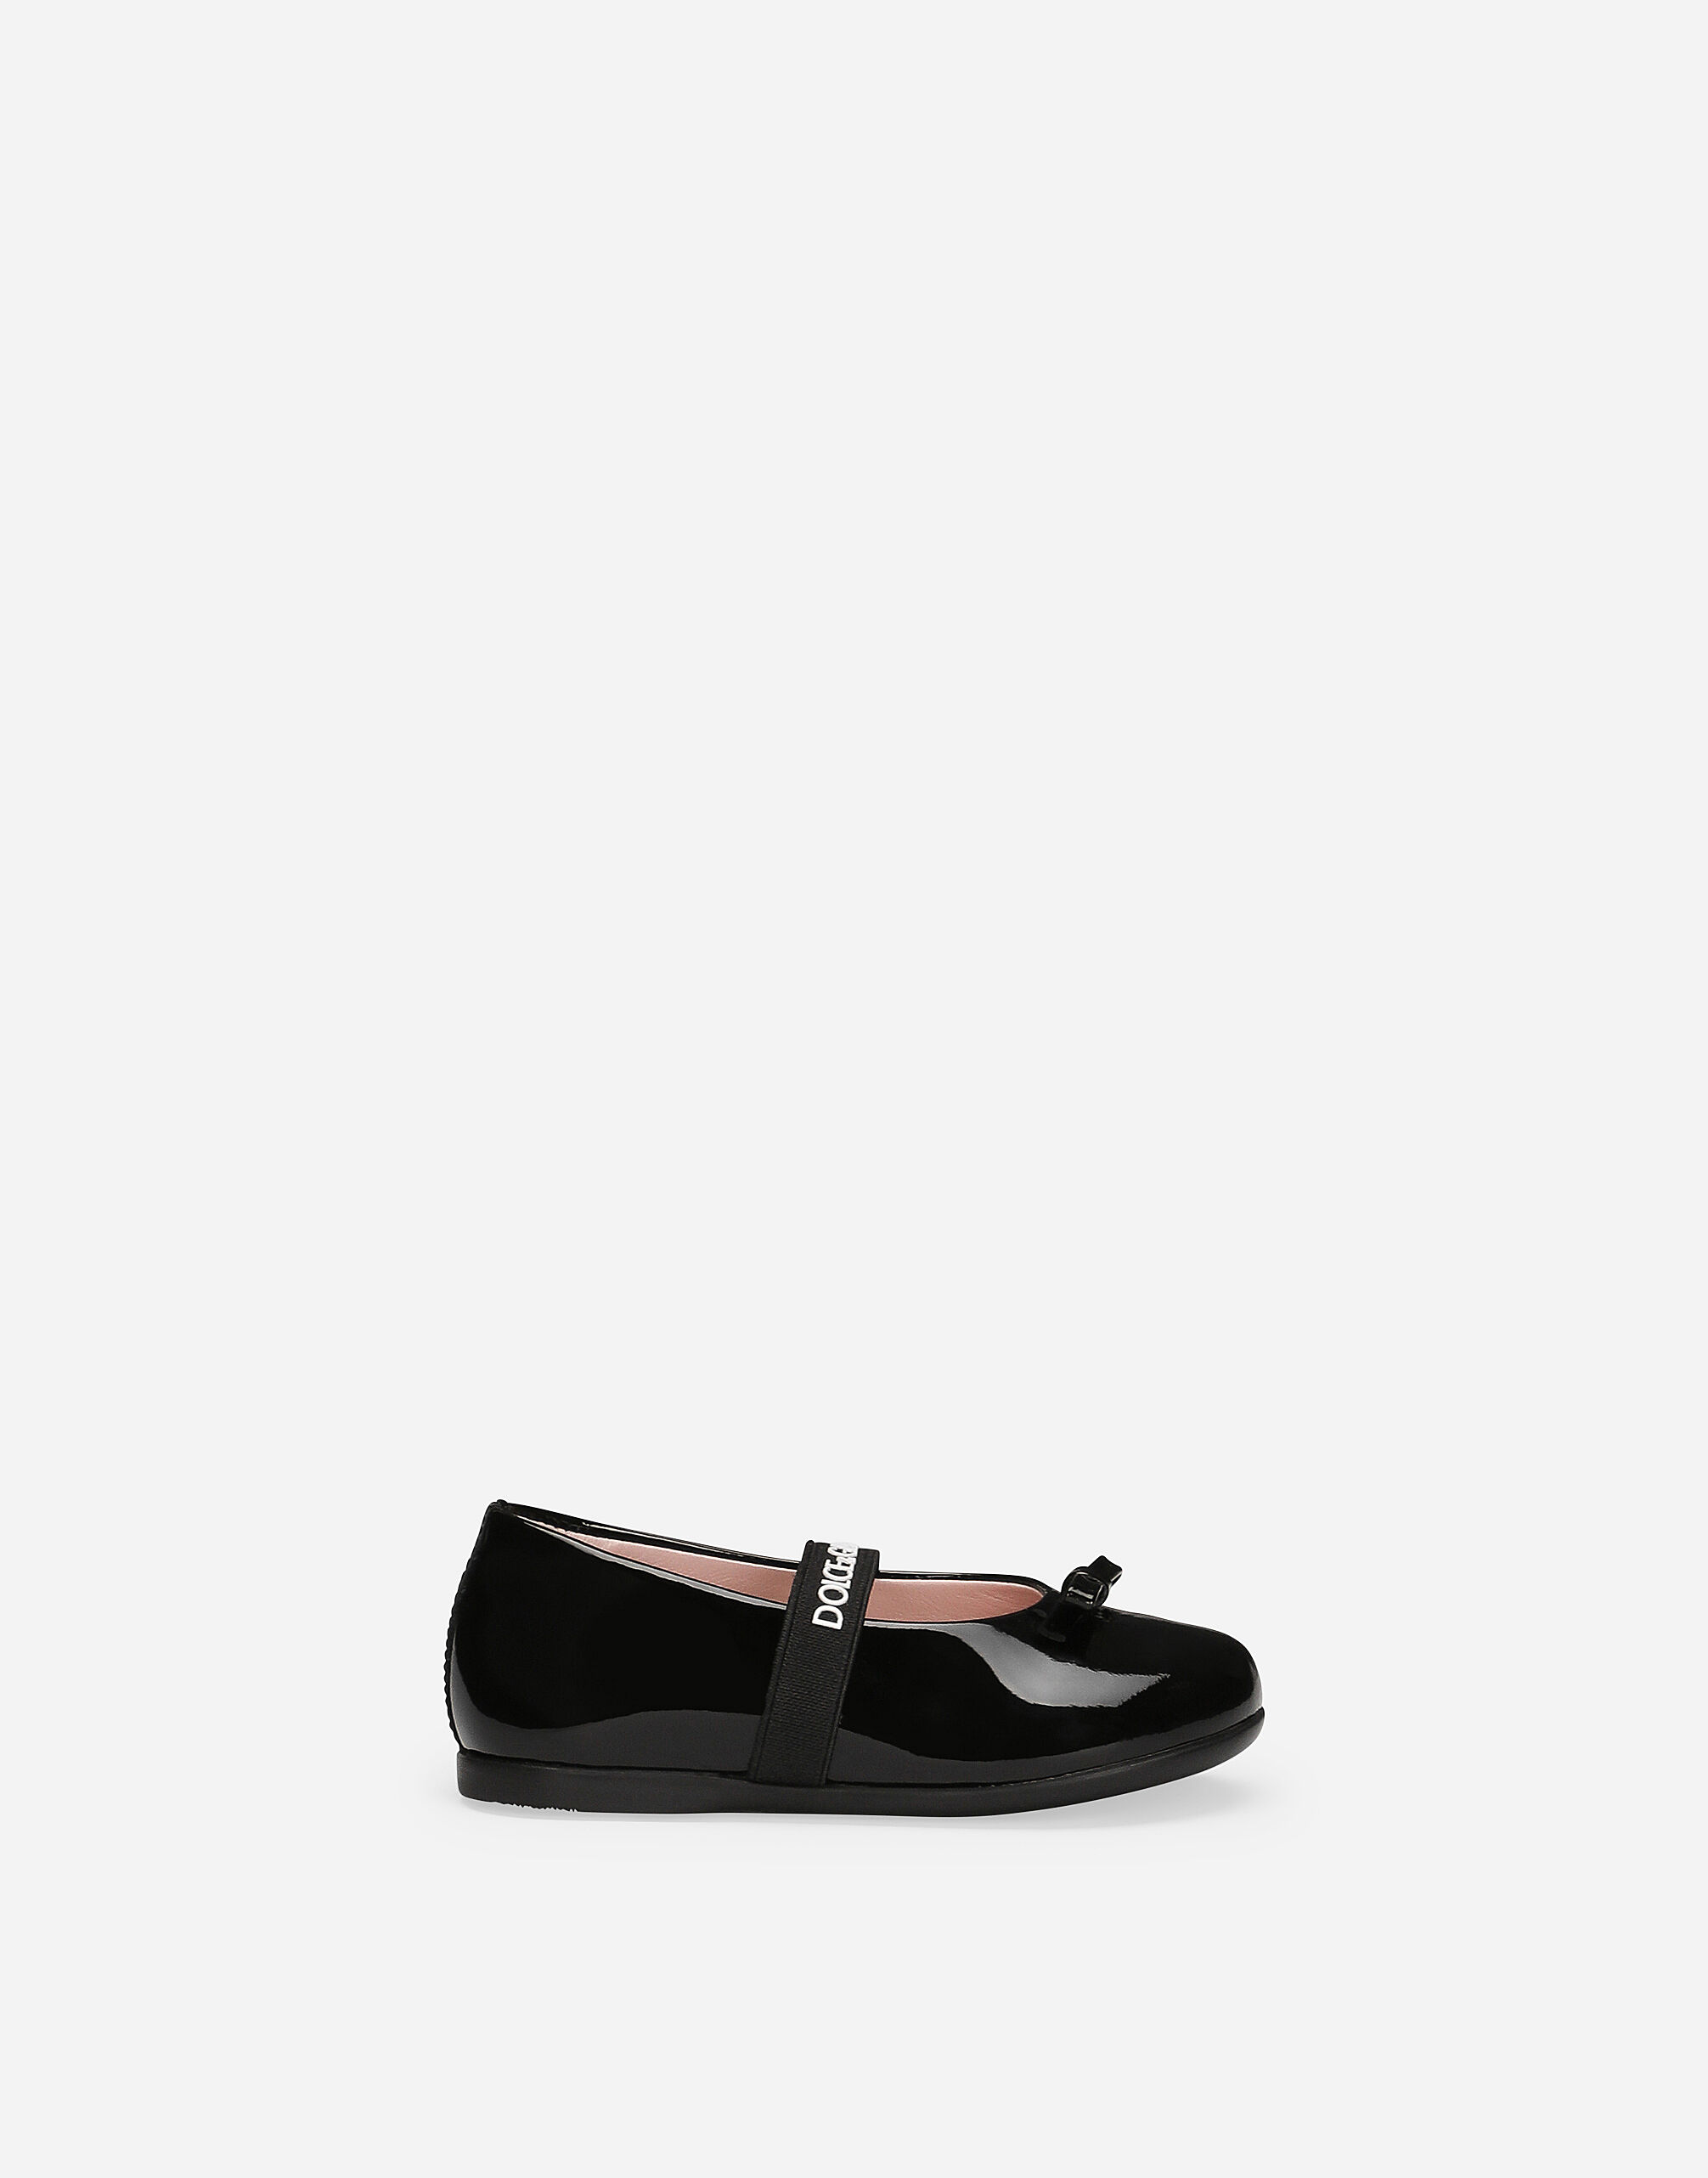 Dolce & Gabbana Patent leather ballet flats with bow Black D20093A4831